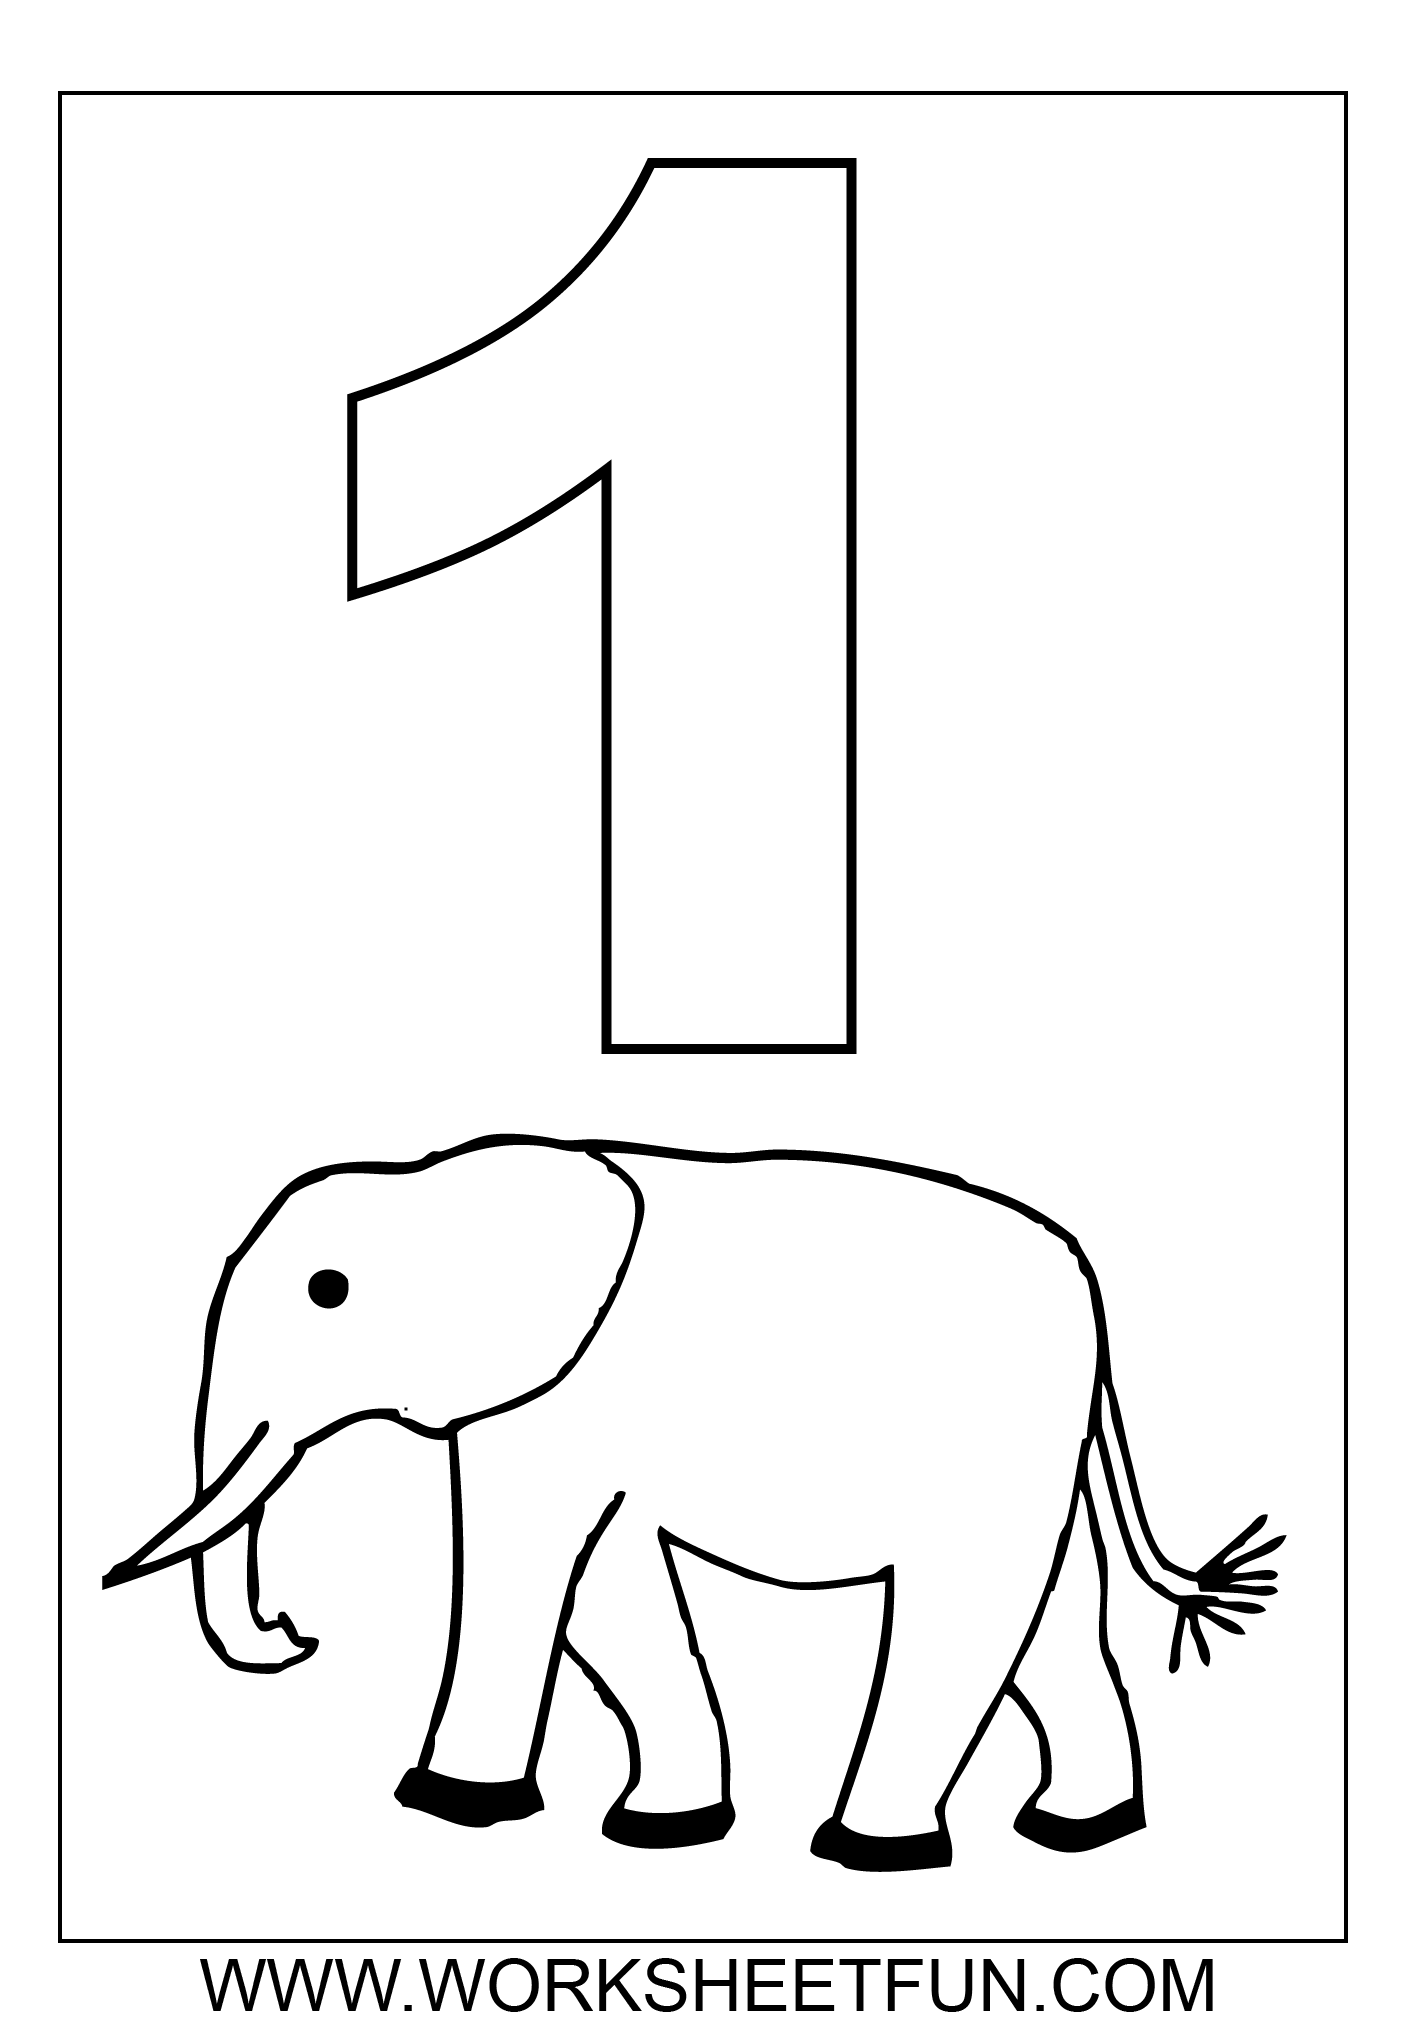 Cool Number One 4 Coloring Page